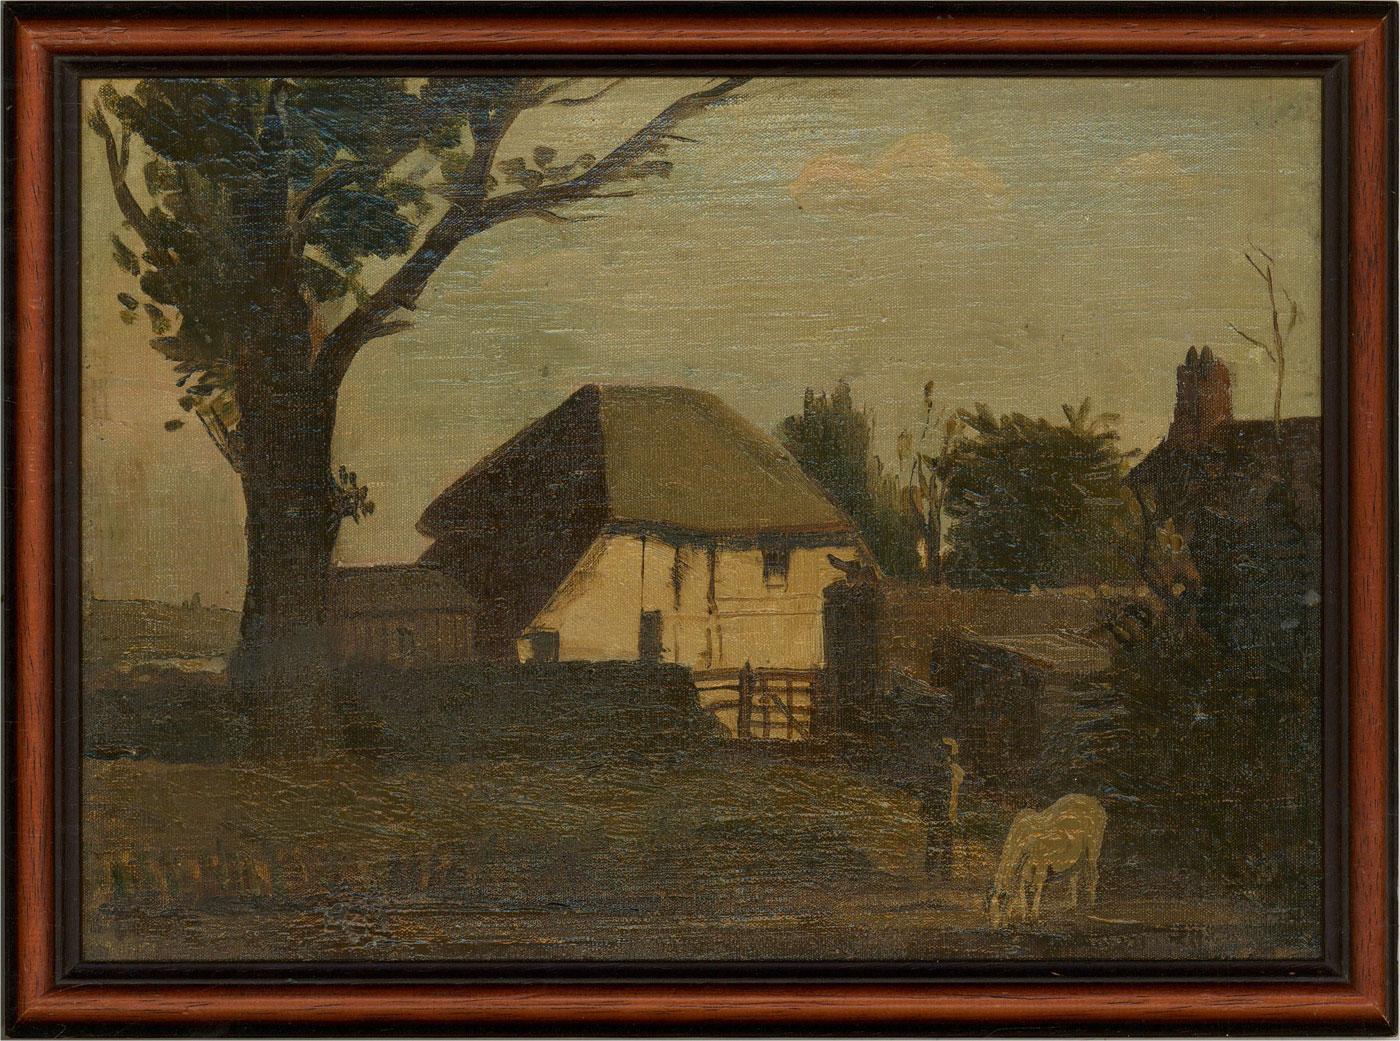 An impressionistic study of a rustic farm cottage in a rural landscape. Presented in a simple wood frame. Unsigned. The painting was acquired by Sulis Fine Art along with a signed work by Padwick and is typical of his style. The horse, in